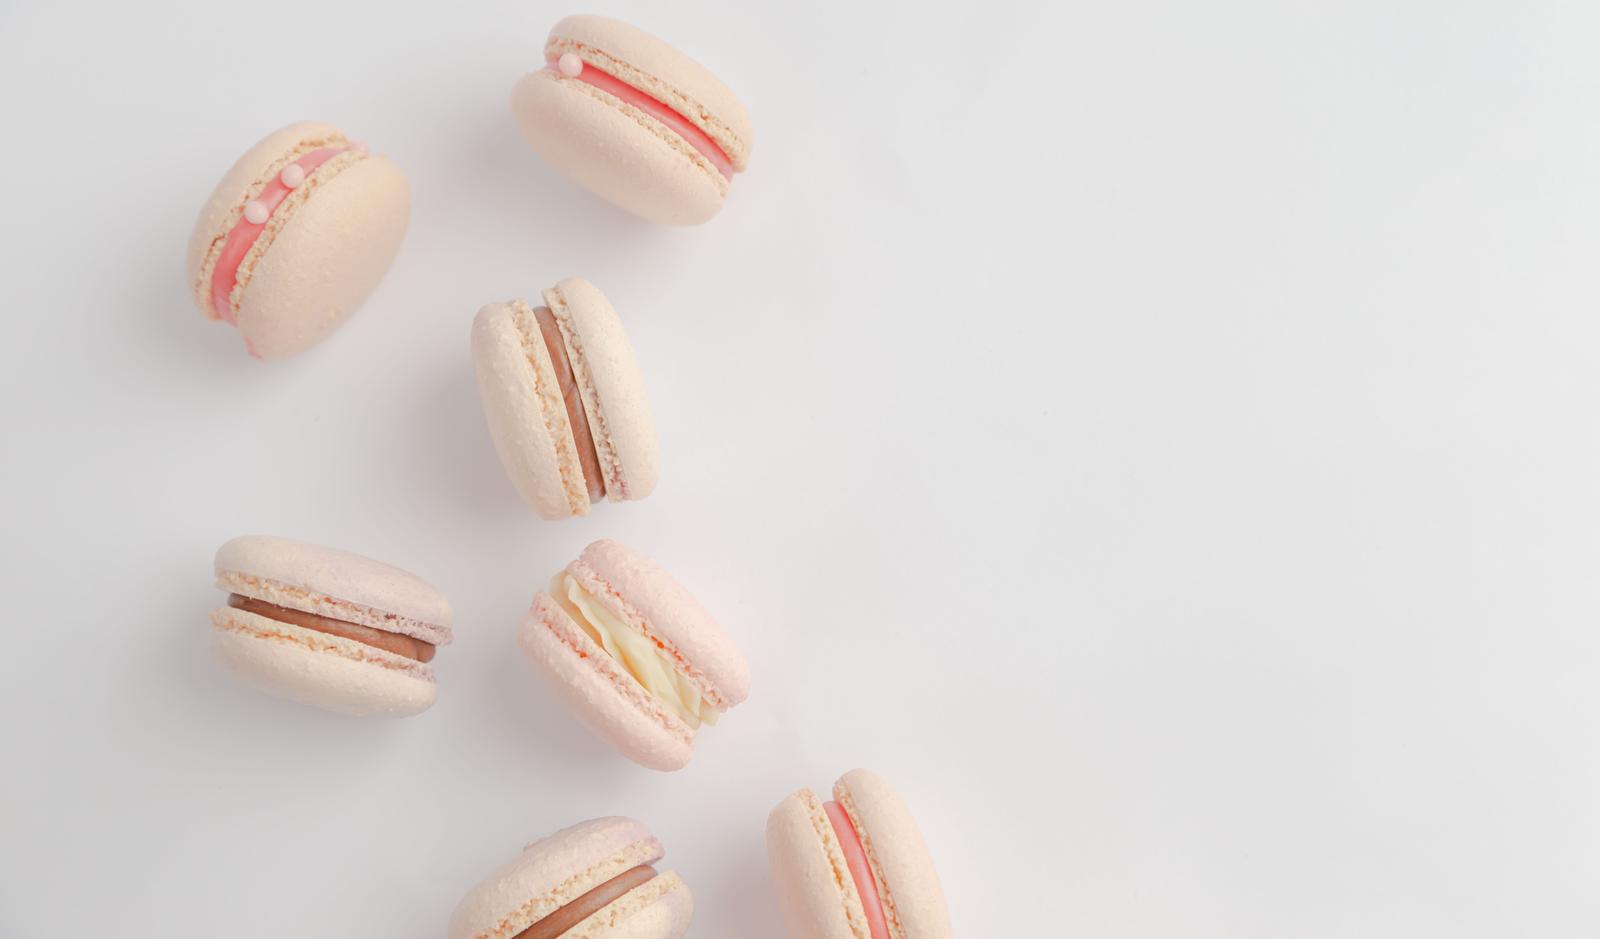 Eat Some 🍰 AI Randomly Generated Desserts to Determine If You’re an Introvert or Extrovert 😃 Vanilla macarons